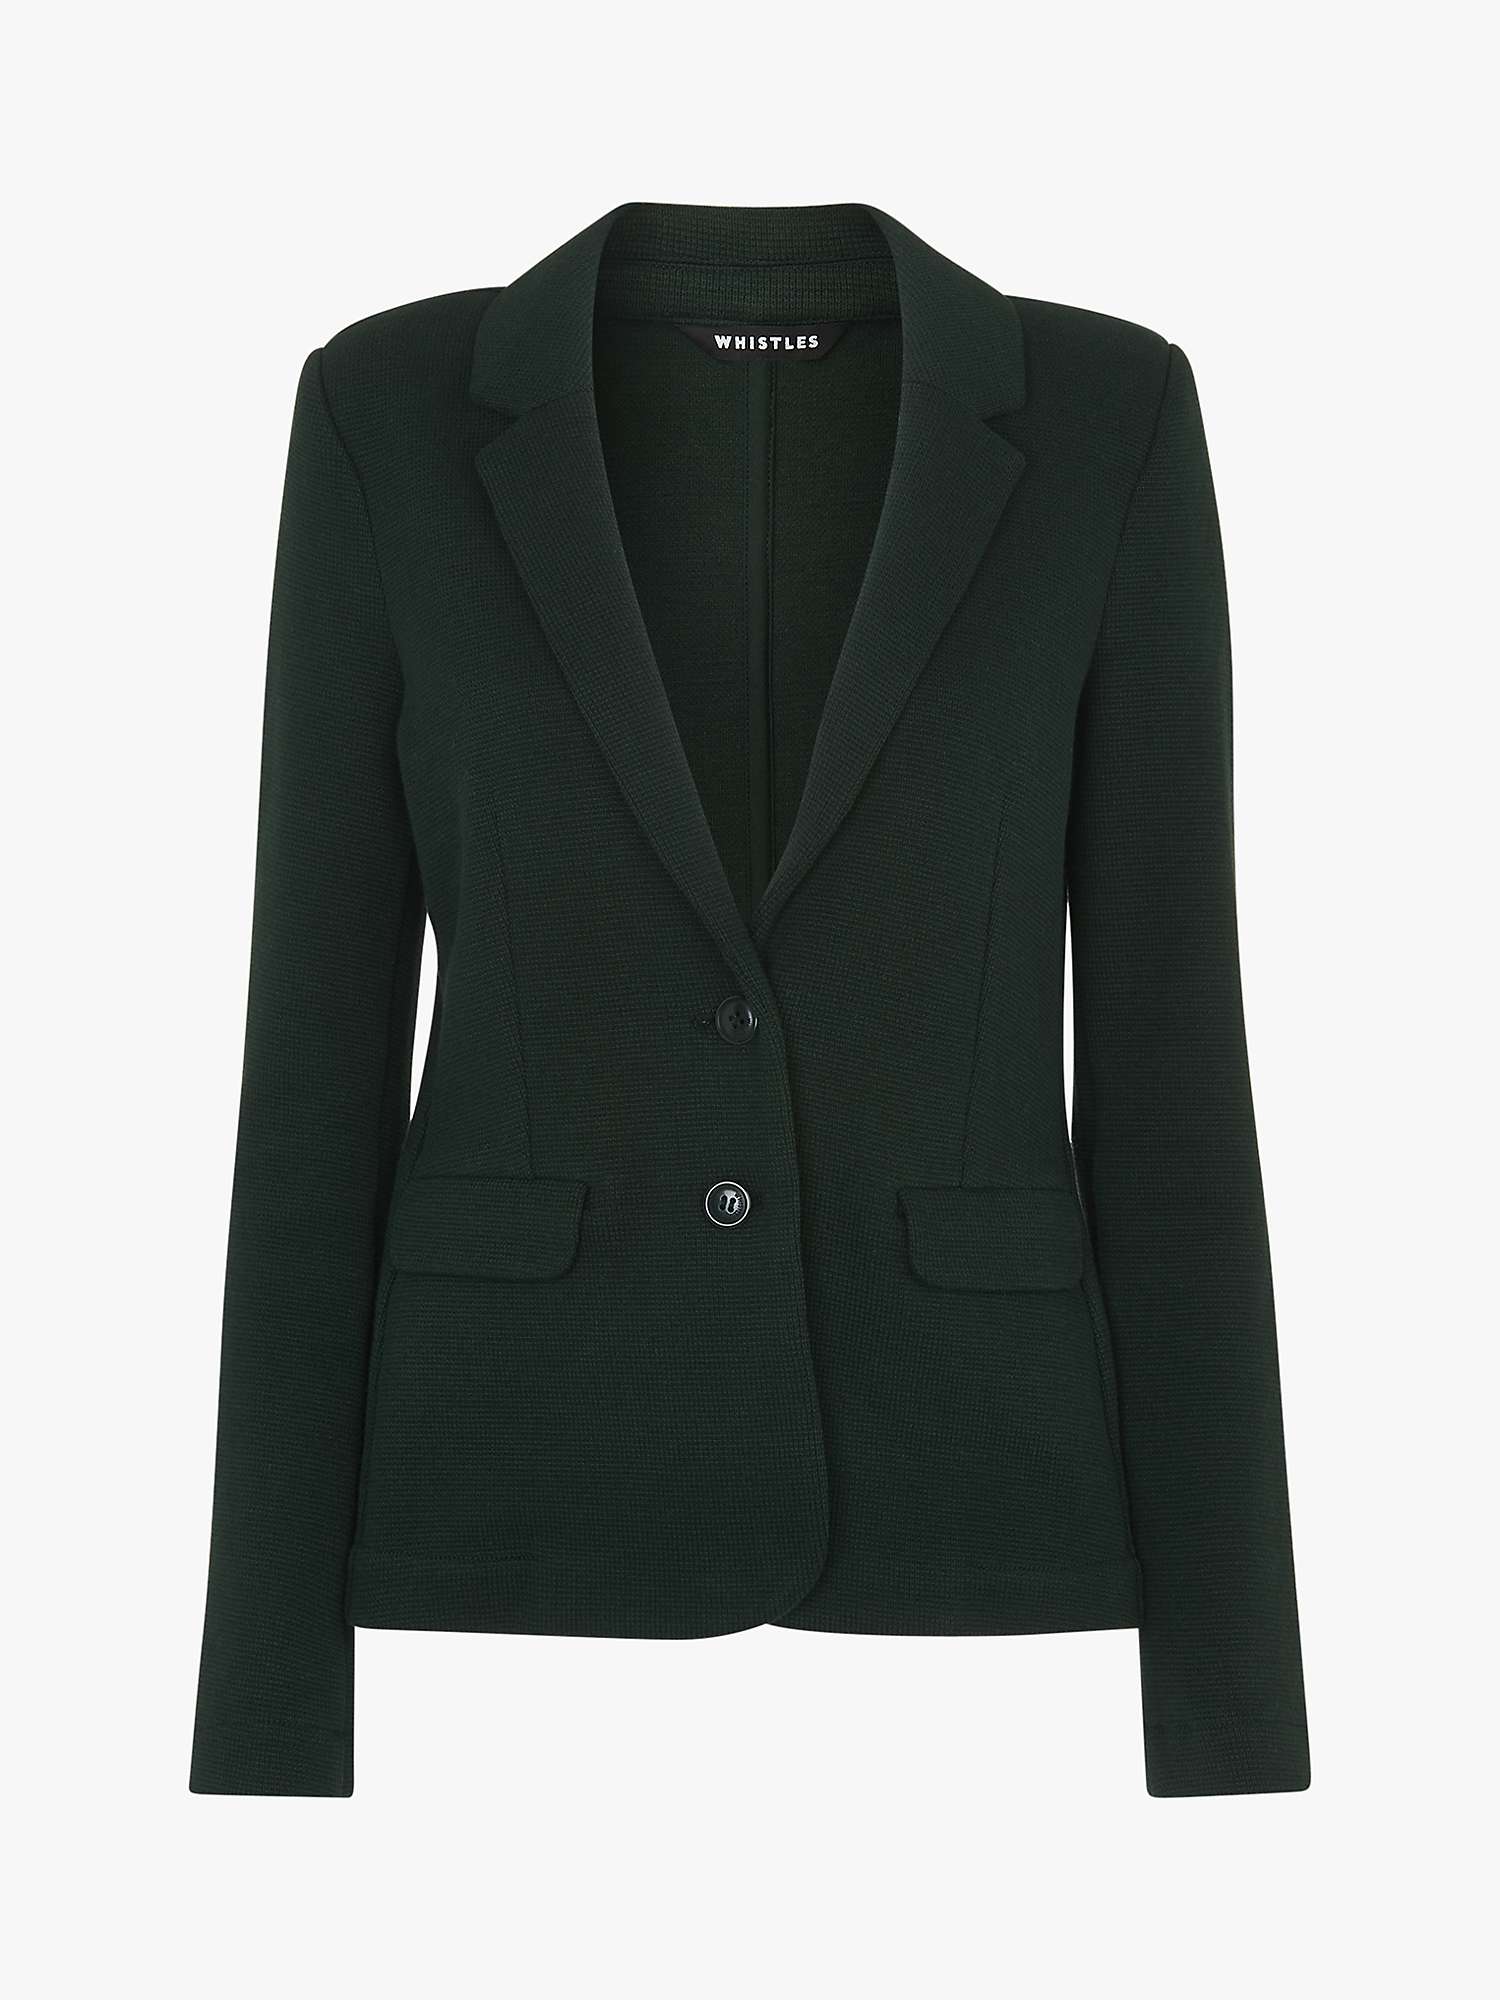 Whistles Slim Jersey Jacket, Forest Green at John Lewis & Partners